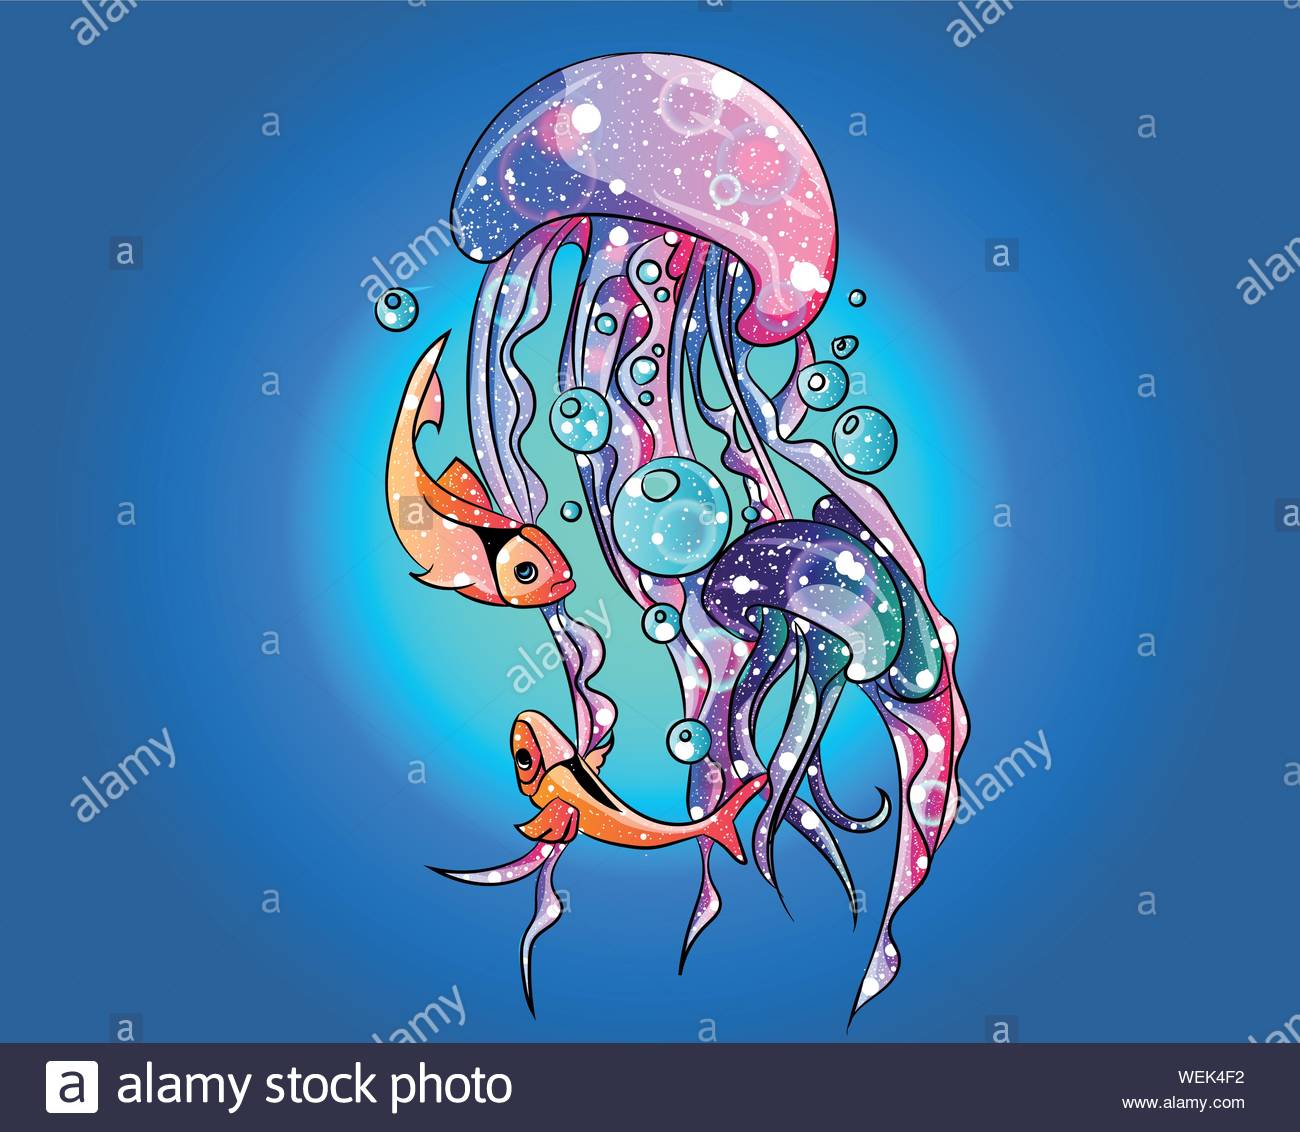 Magic Fantasy Jellyfish Swimming In The Ocean With Fishes